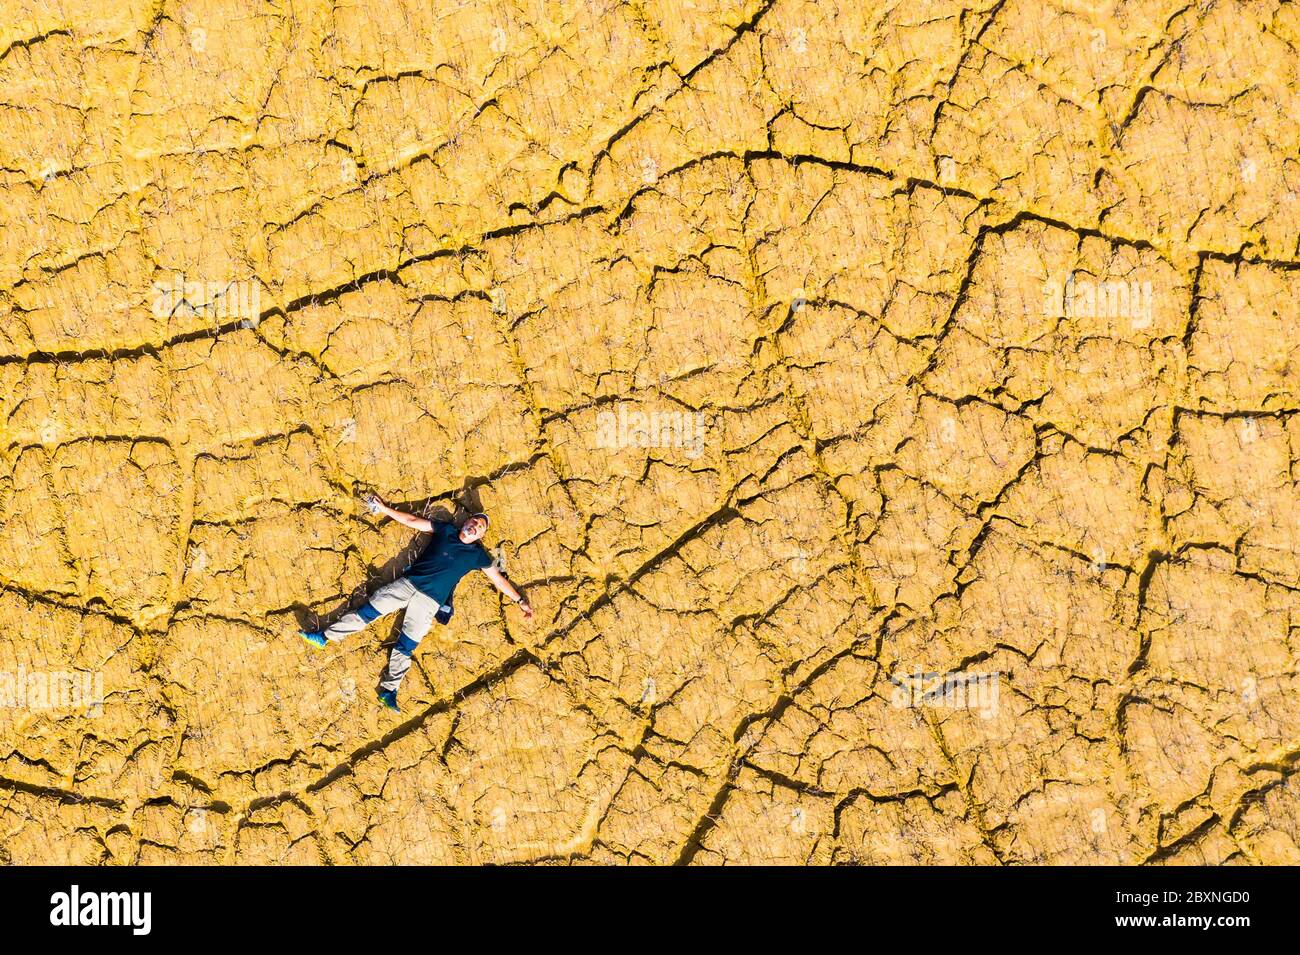 Man lying on a land cracked by drought. Stock Photo